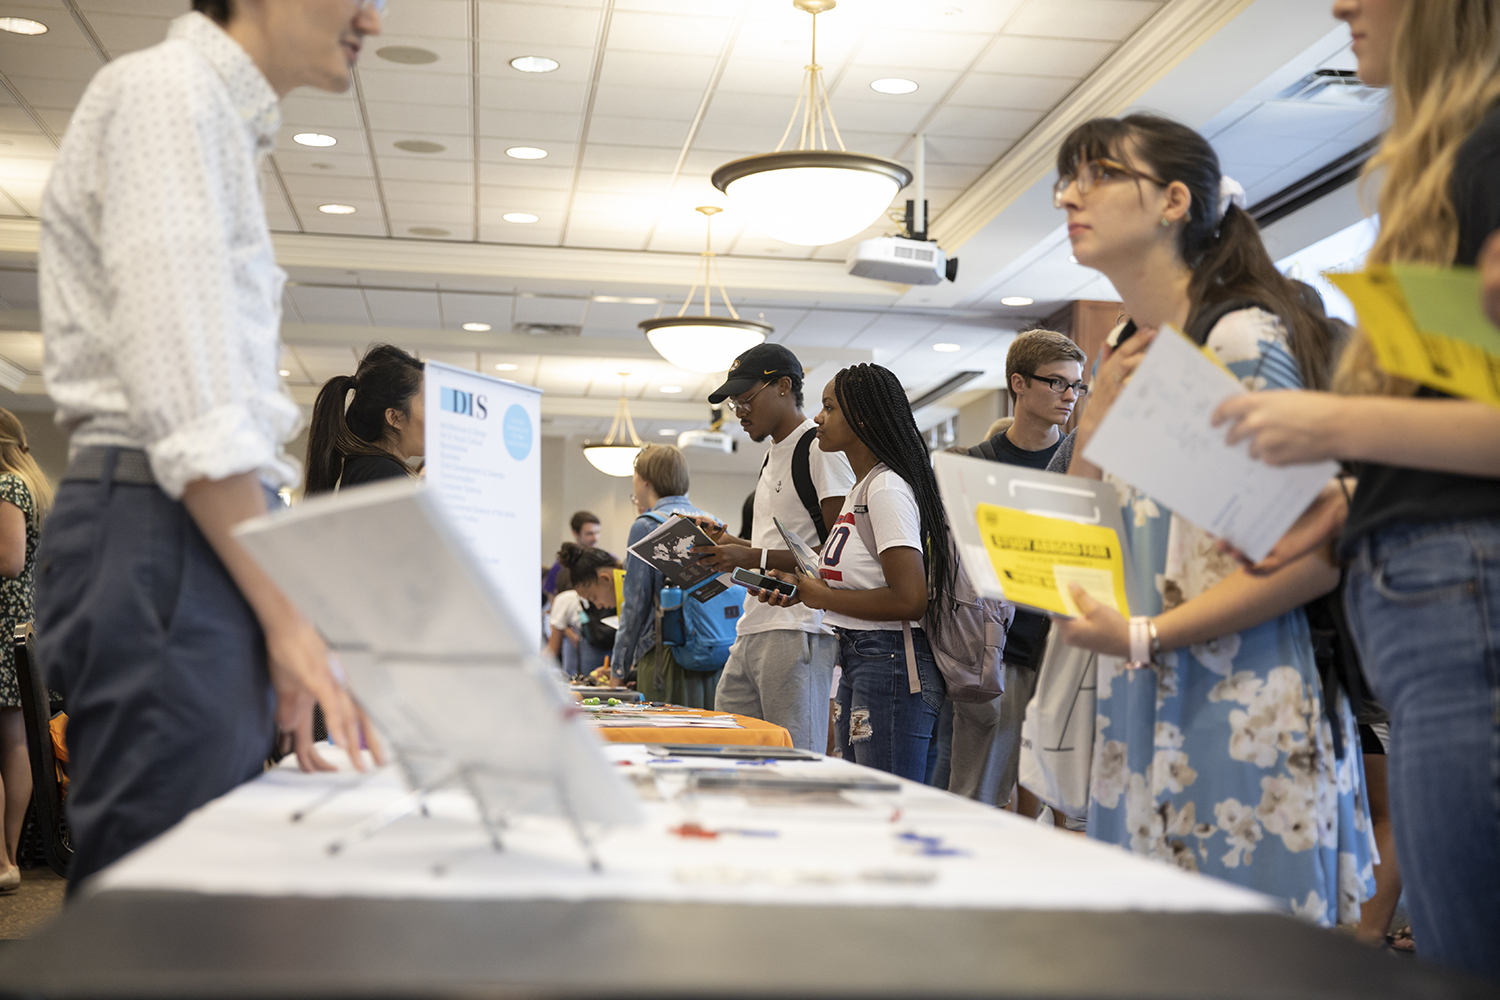 The International Center Study Abroad Fair held in Memorial Union on Wednesday Sept. 04, 2019. Sam O'Keefe/University of Missouri